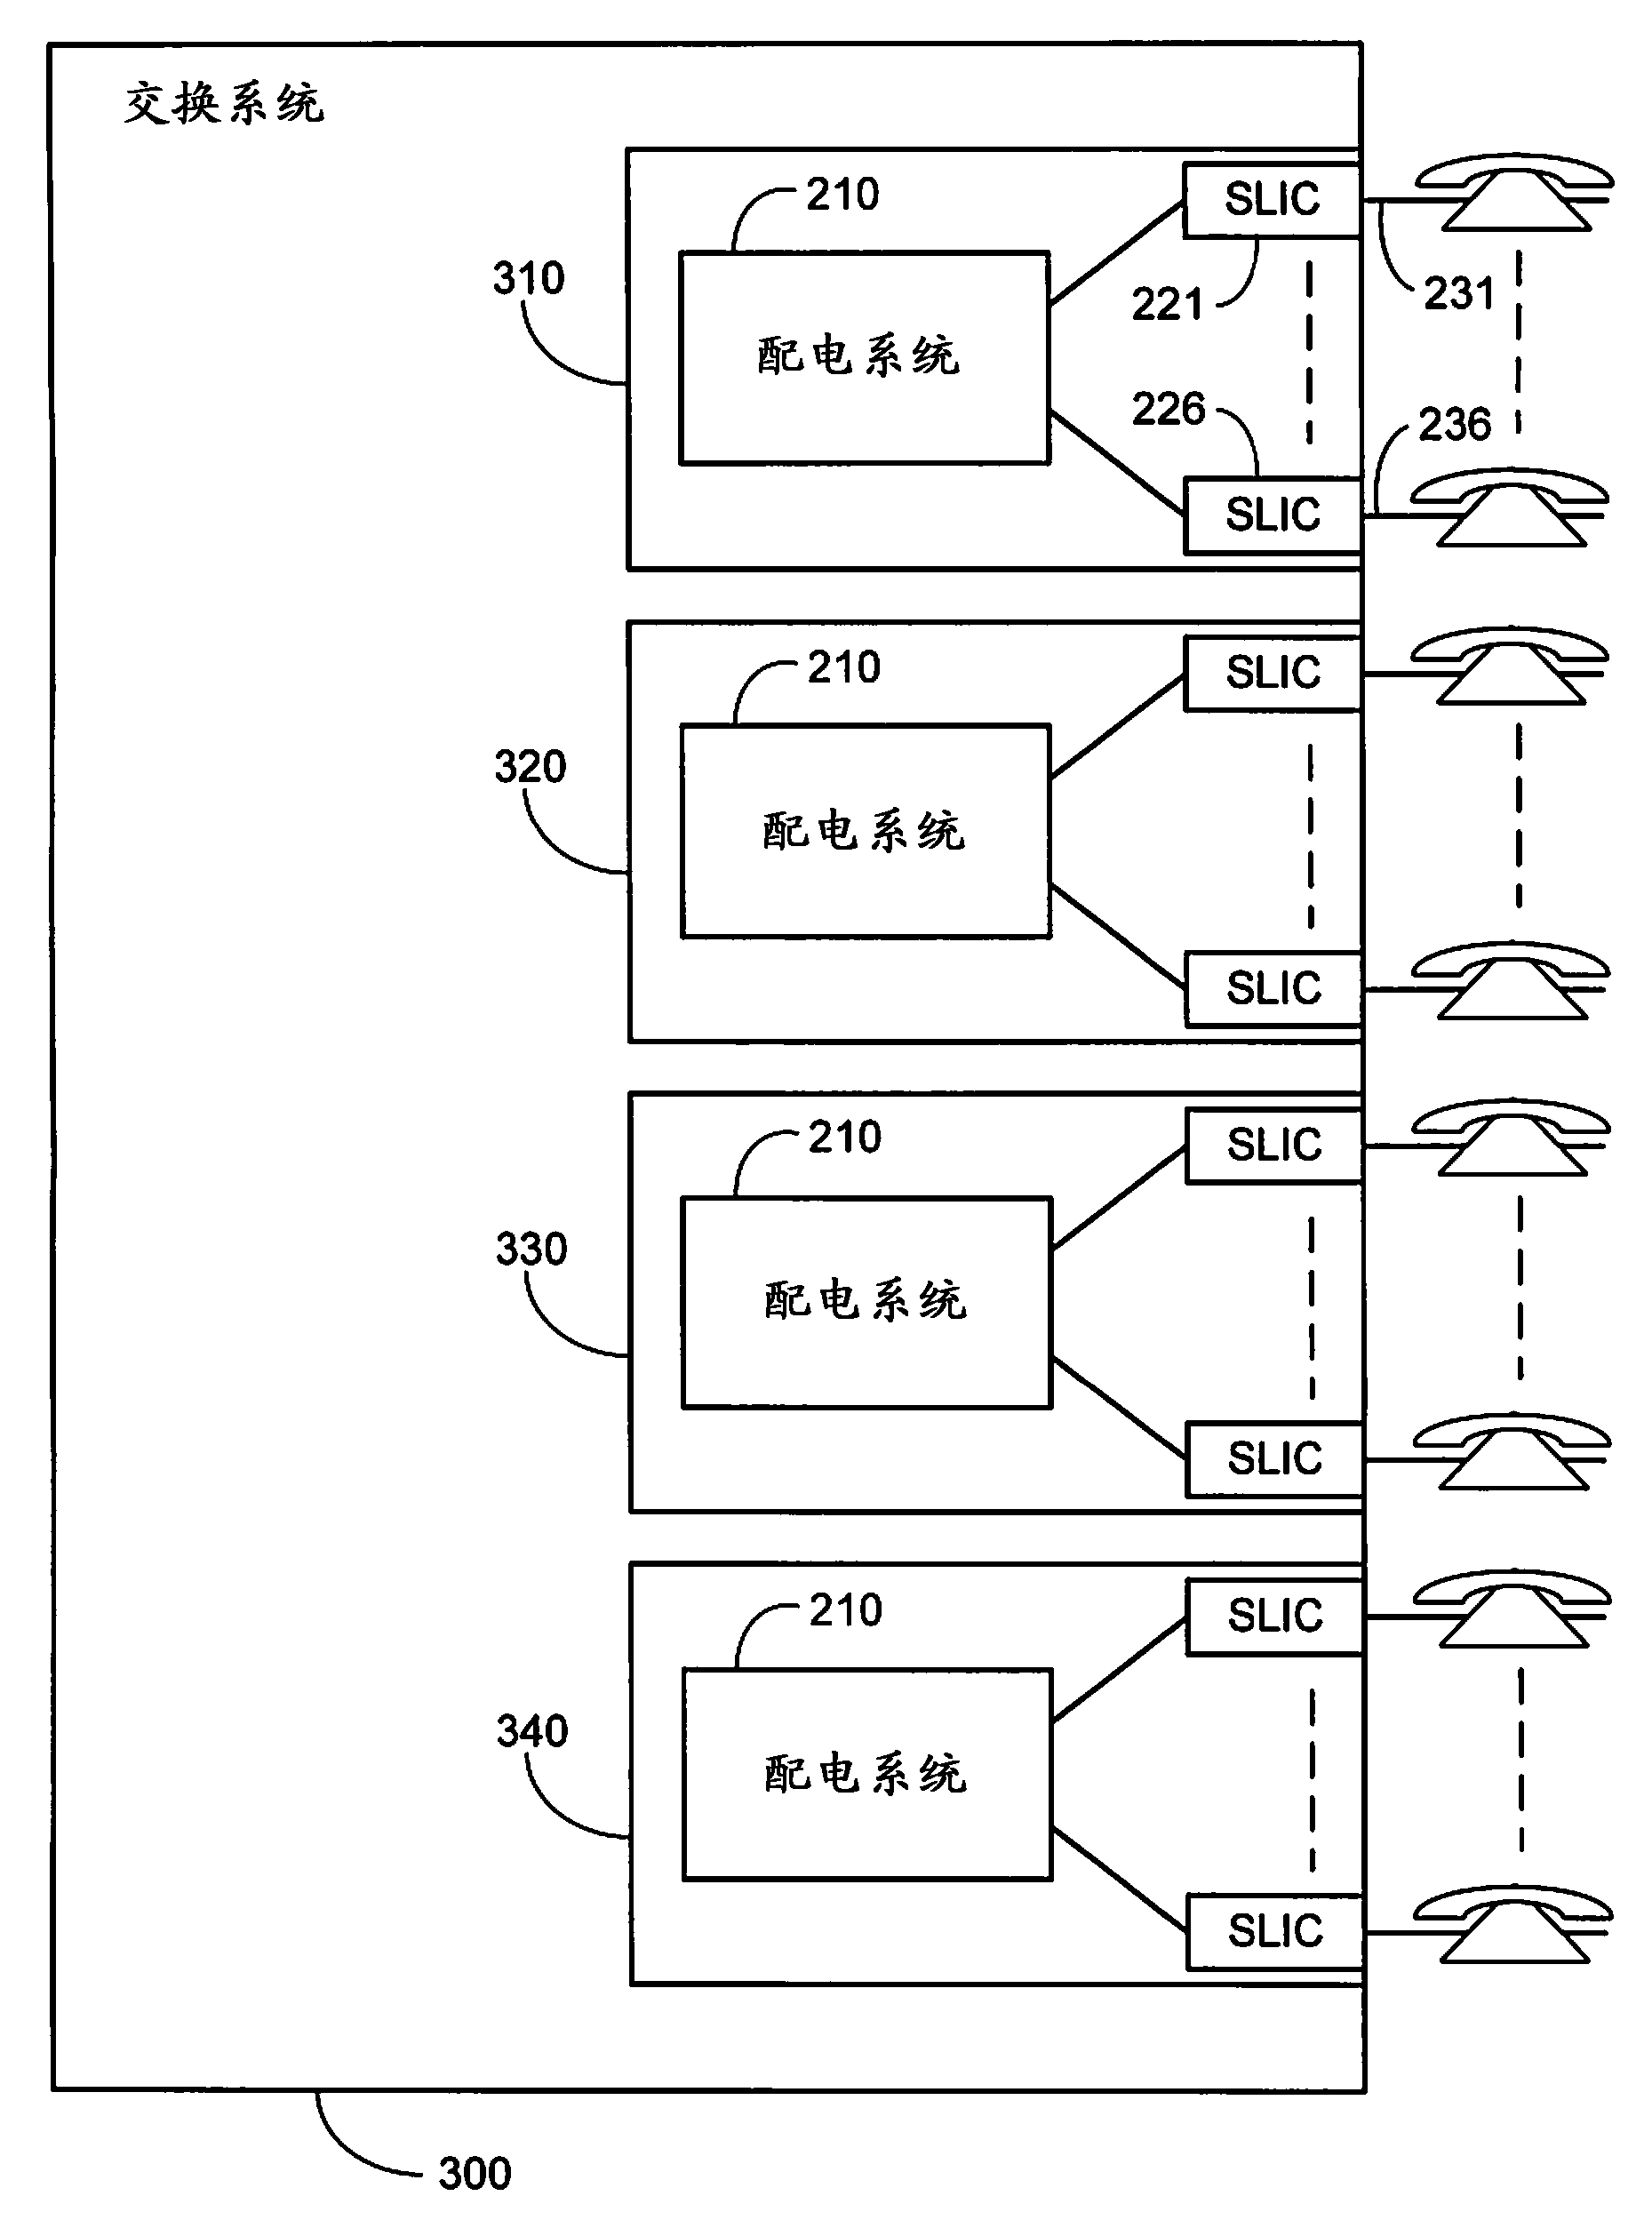 Subscriber line power distribution system